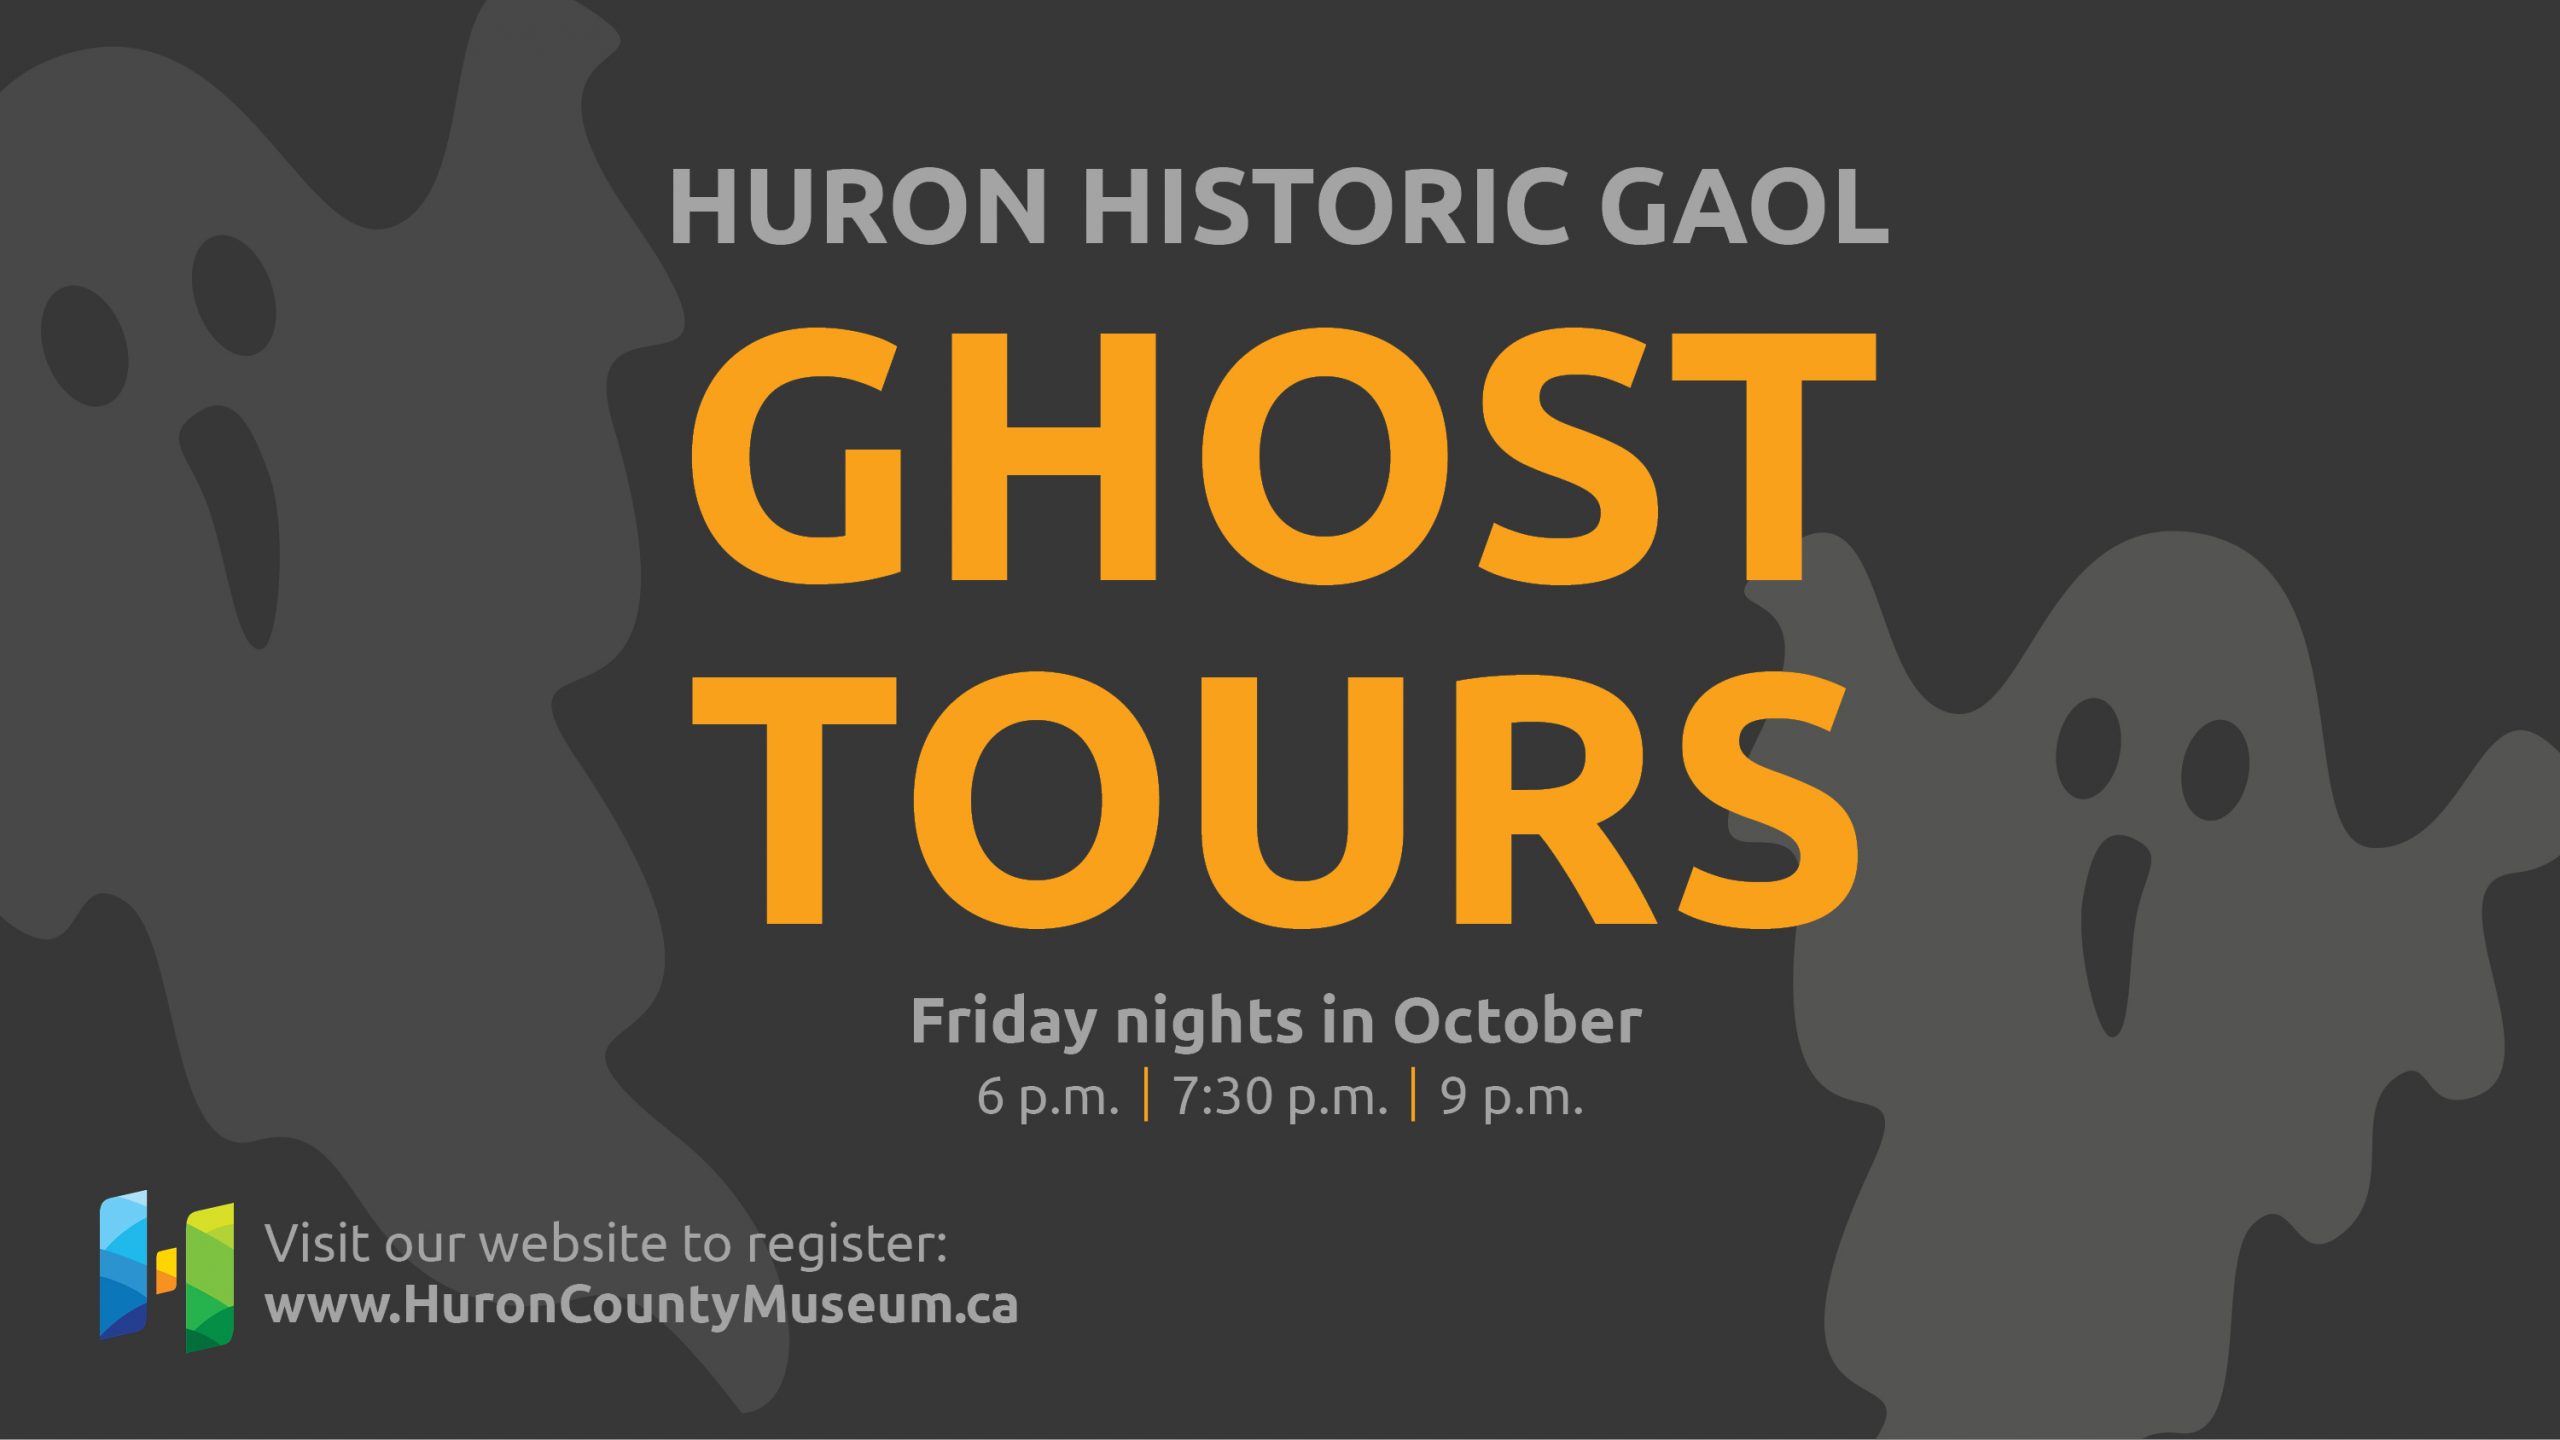 Huron Historic Gaol Ghost Tours